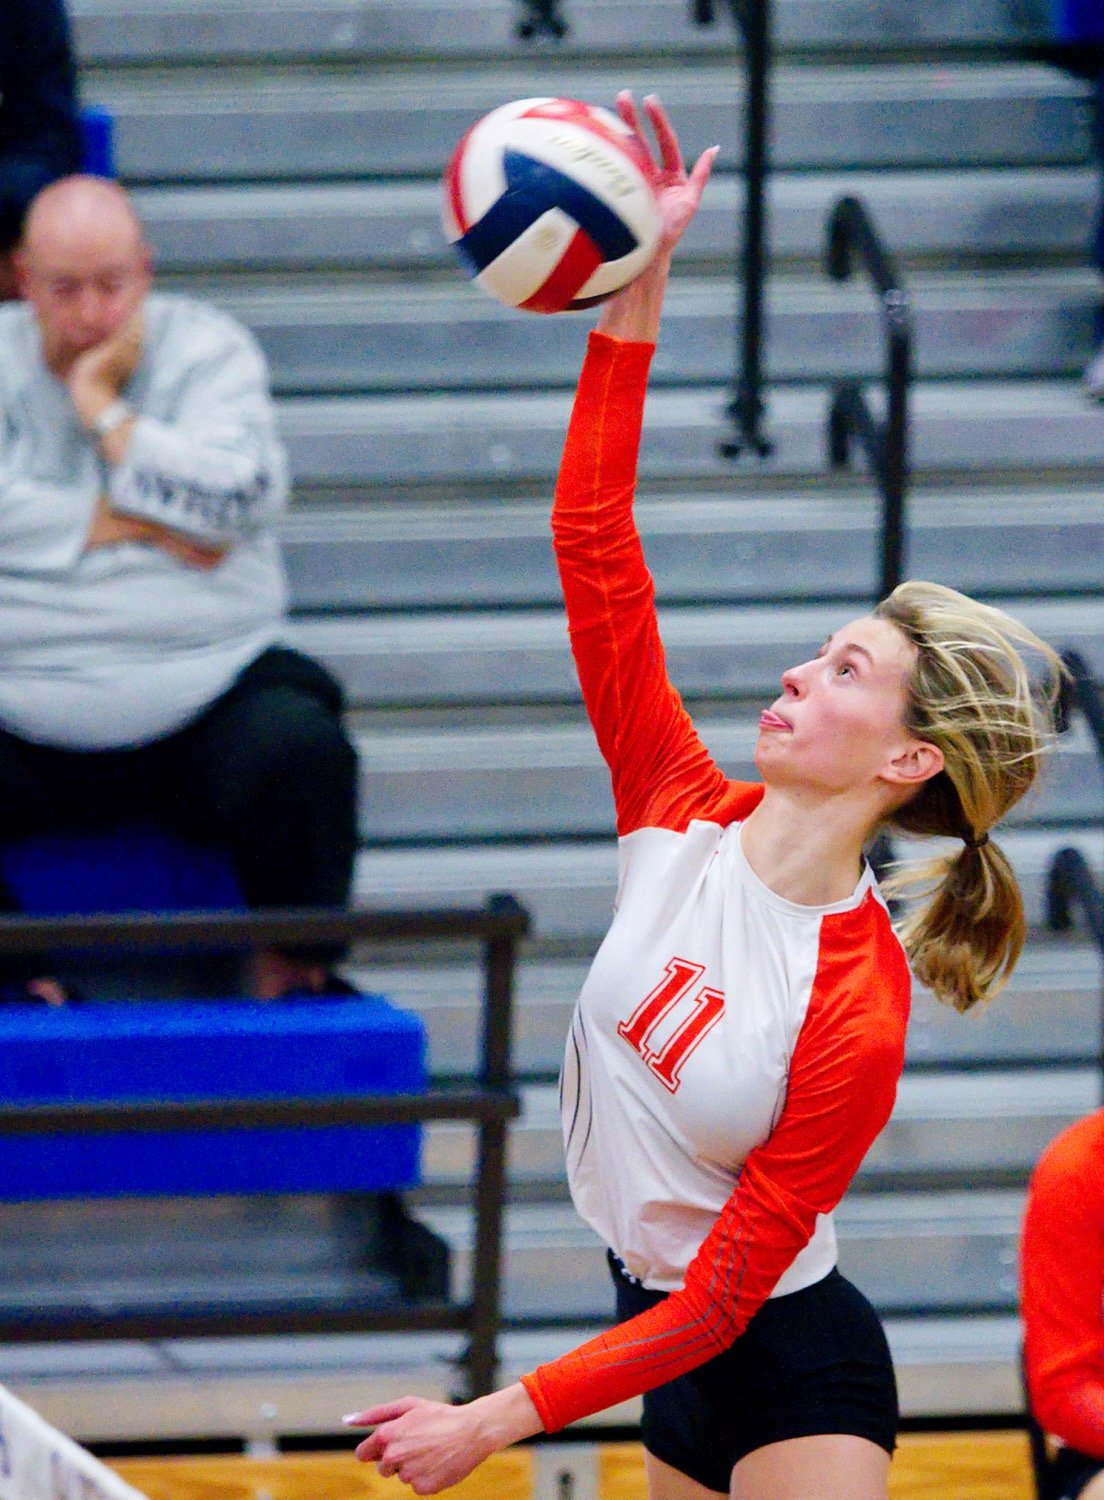 Olivia Hughes sends the ball back over the net with some gusto. [view more volleyball shots]